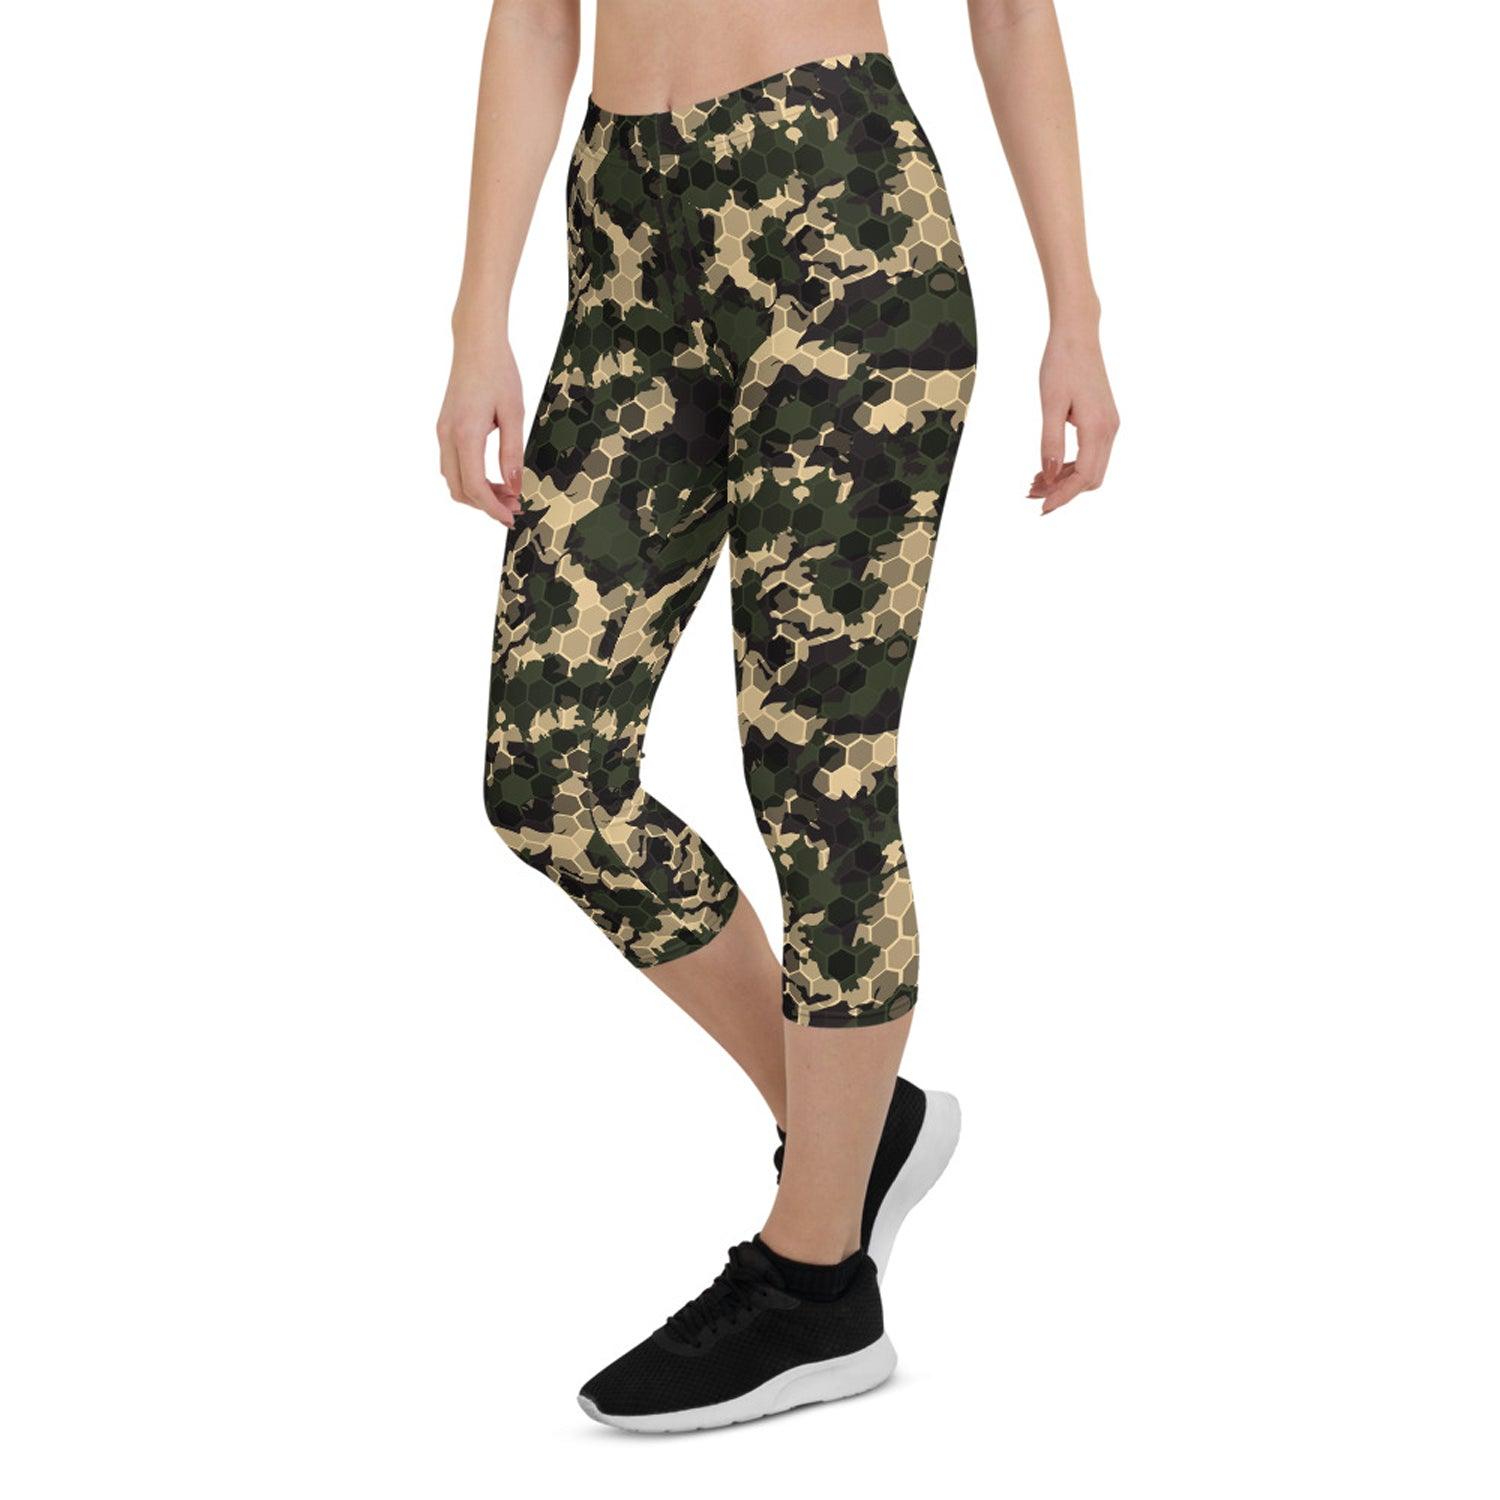 Womens Army Camo Capri Leggings with Honeycombs - VirtuousWares:Global